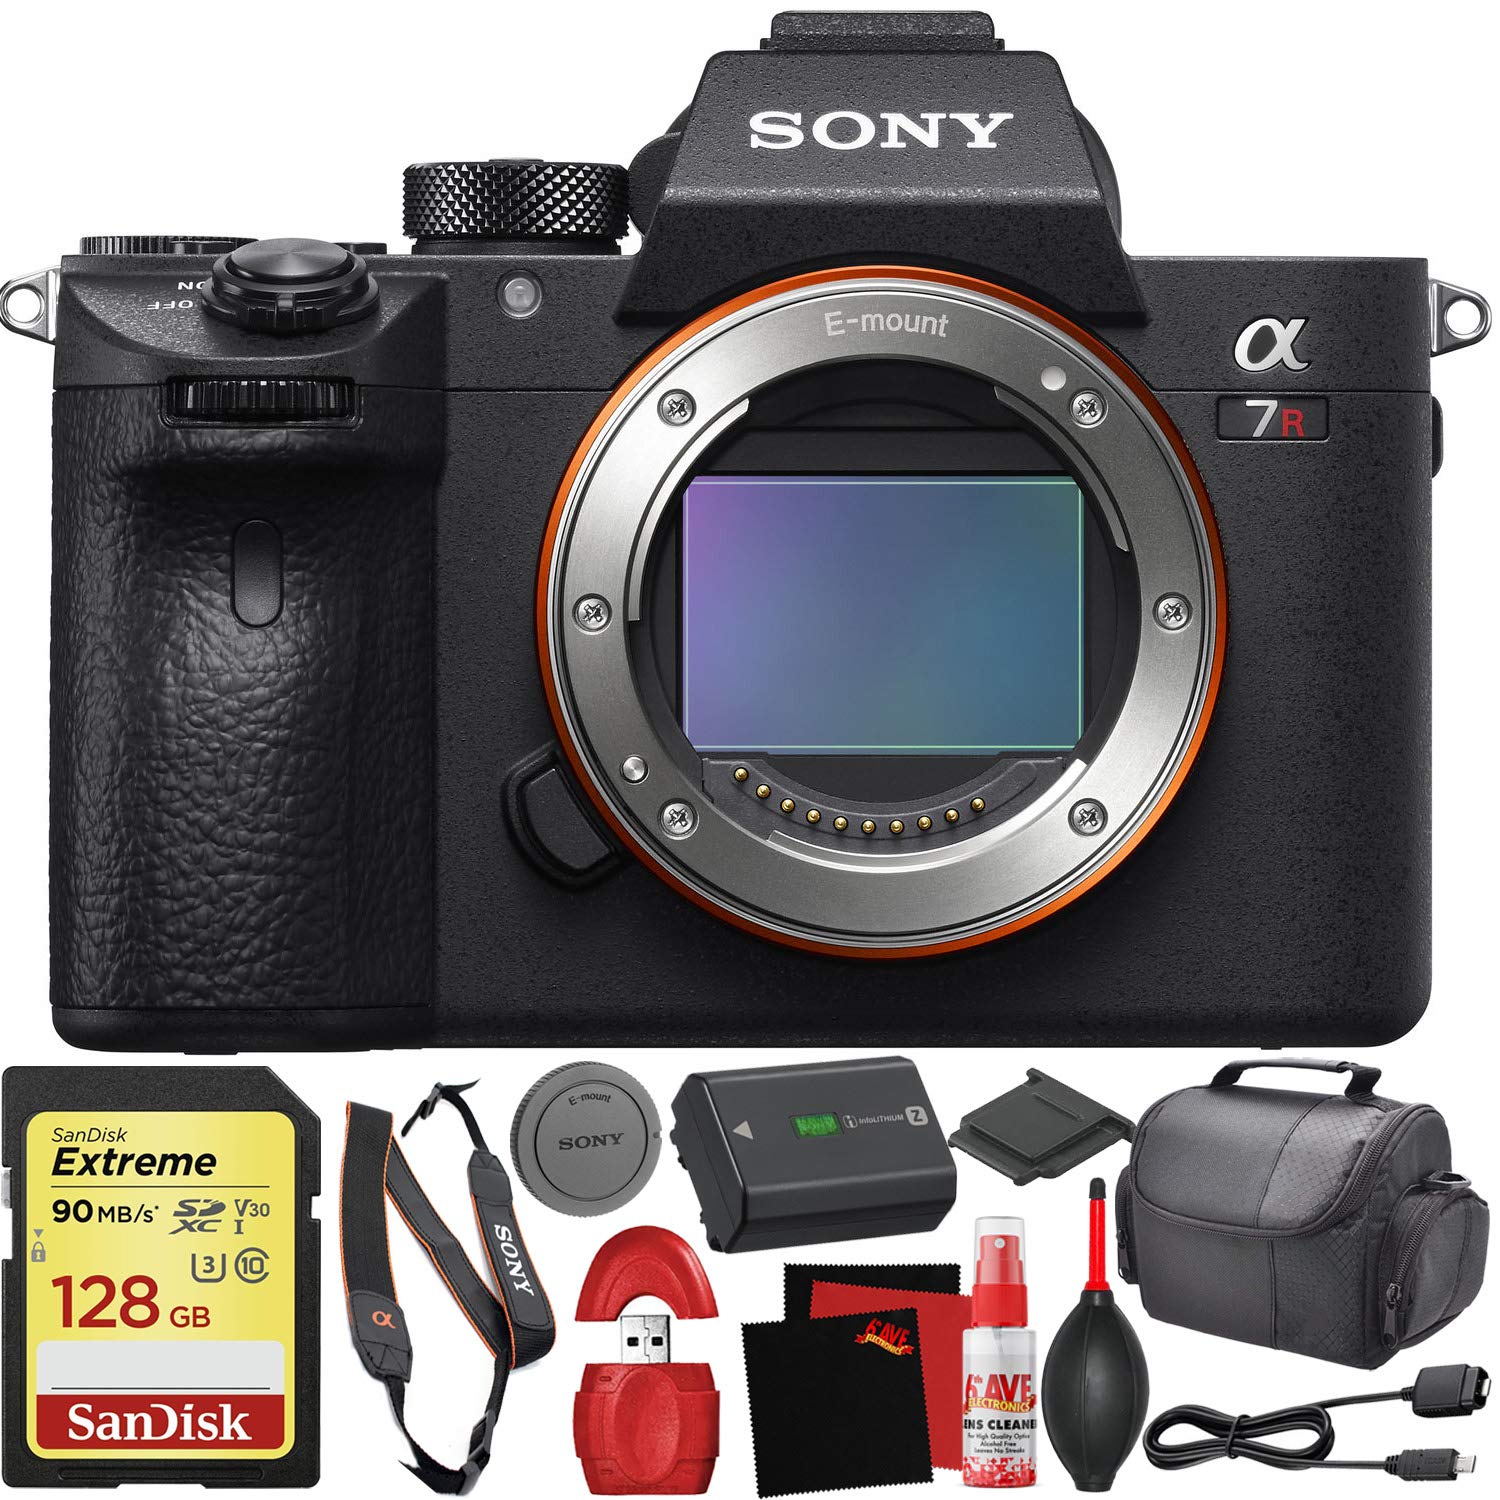 Sony Alpha a7R III Mirrorless Digital Camera + Base Bundle with Accessories (128GB Memory Card, Accessory Kit)